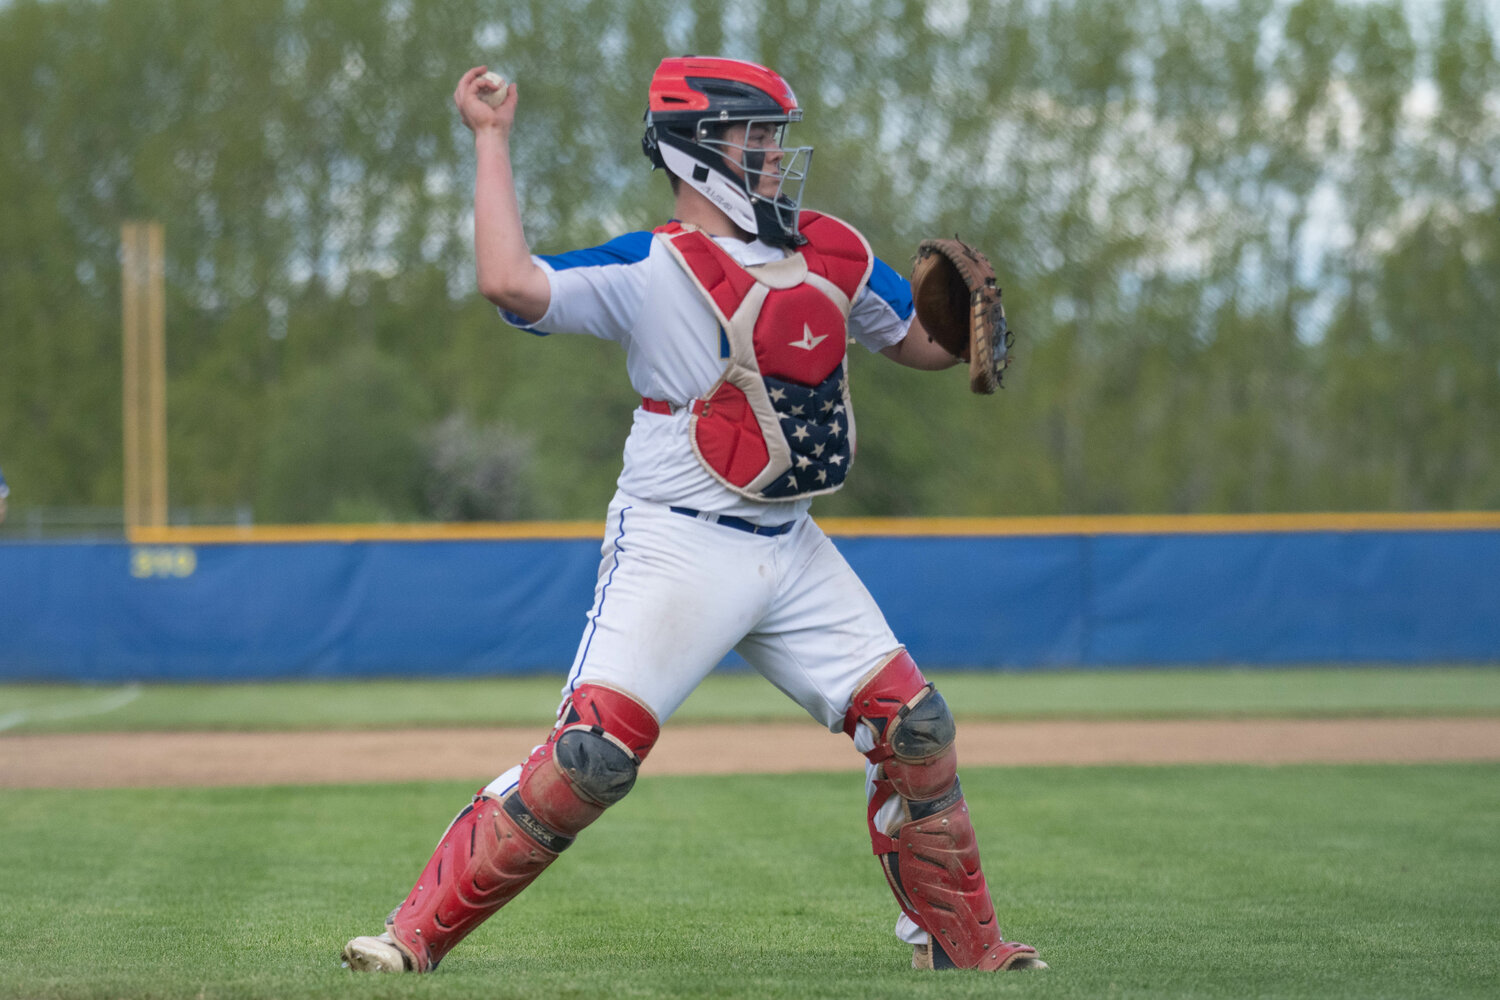 Sawyer Terry fields a bunt and throws to first during Adna's 15-5 loss to Toutle Lake in the 2B District 4 tournament semifinals, in Adna on May 9.